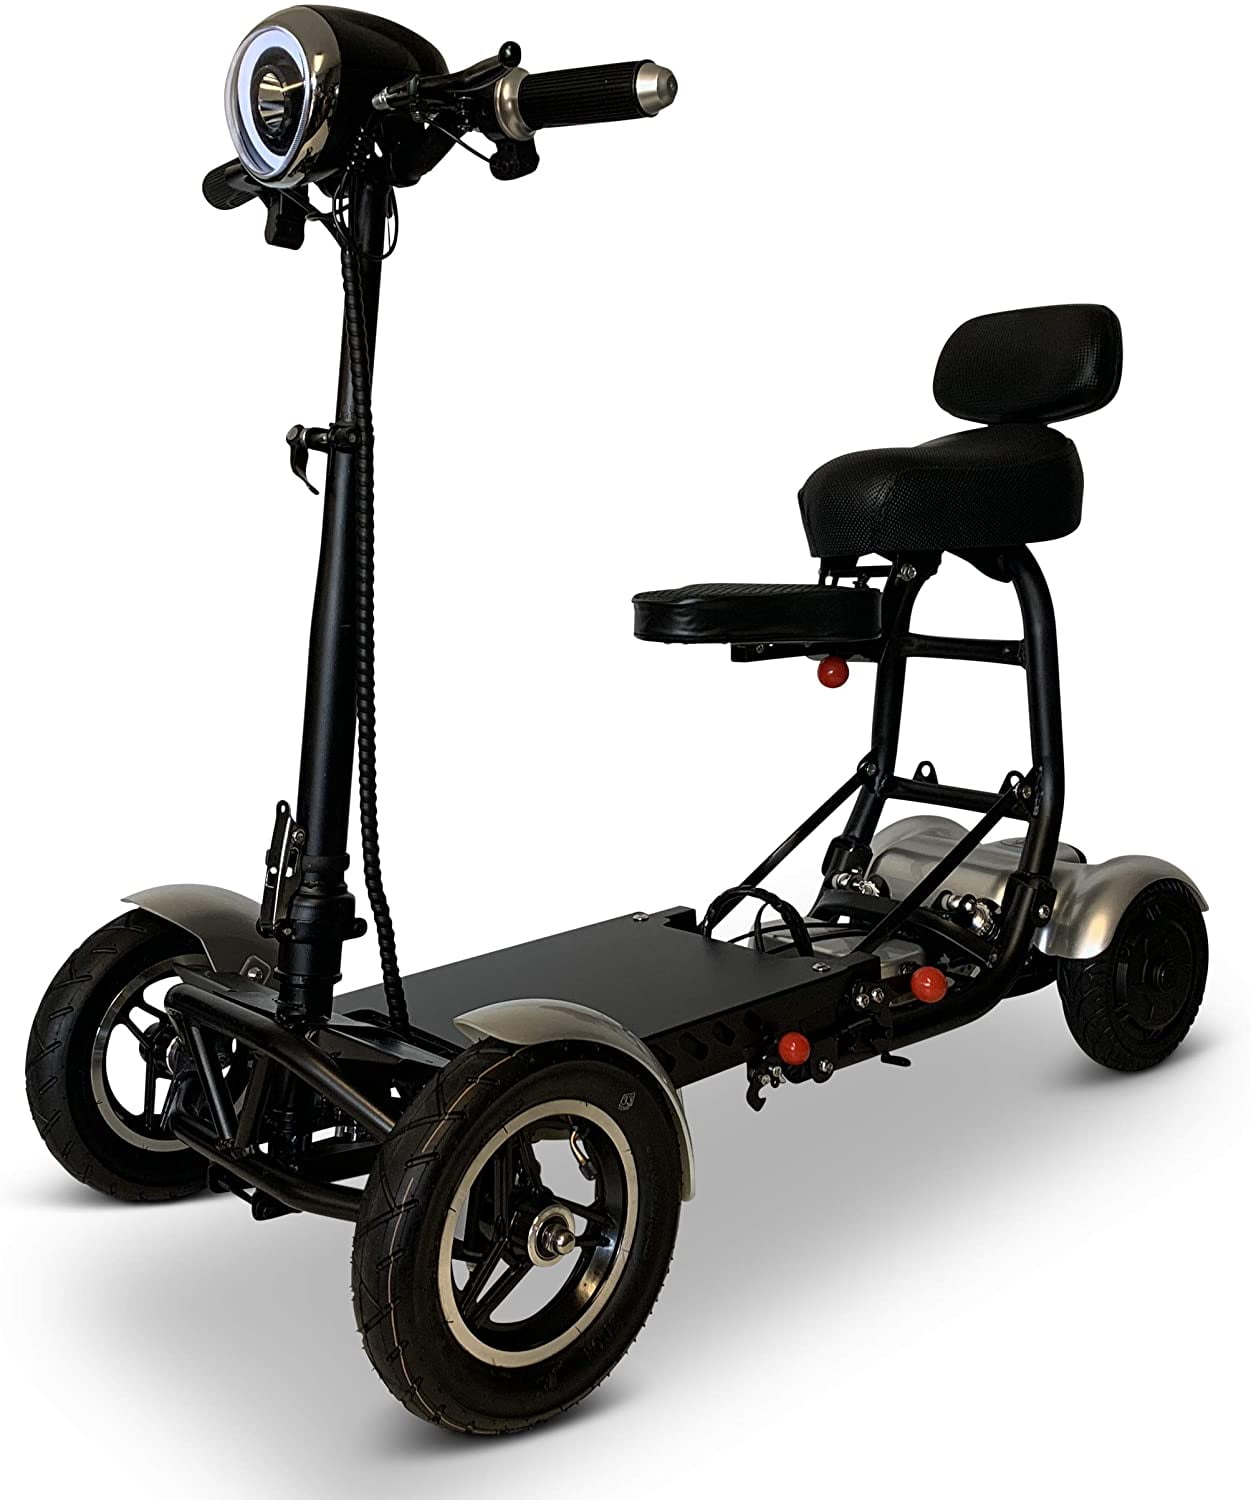 Foldable Lightweight Mobility Scooters for Seniors, Folding Electric